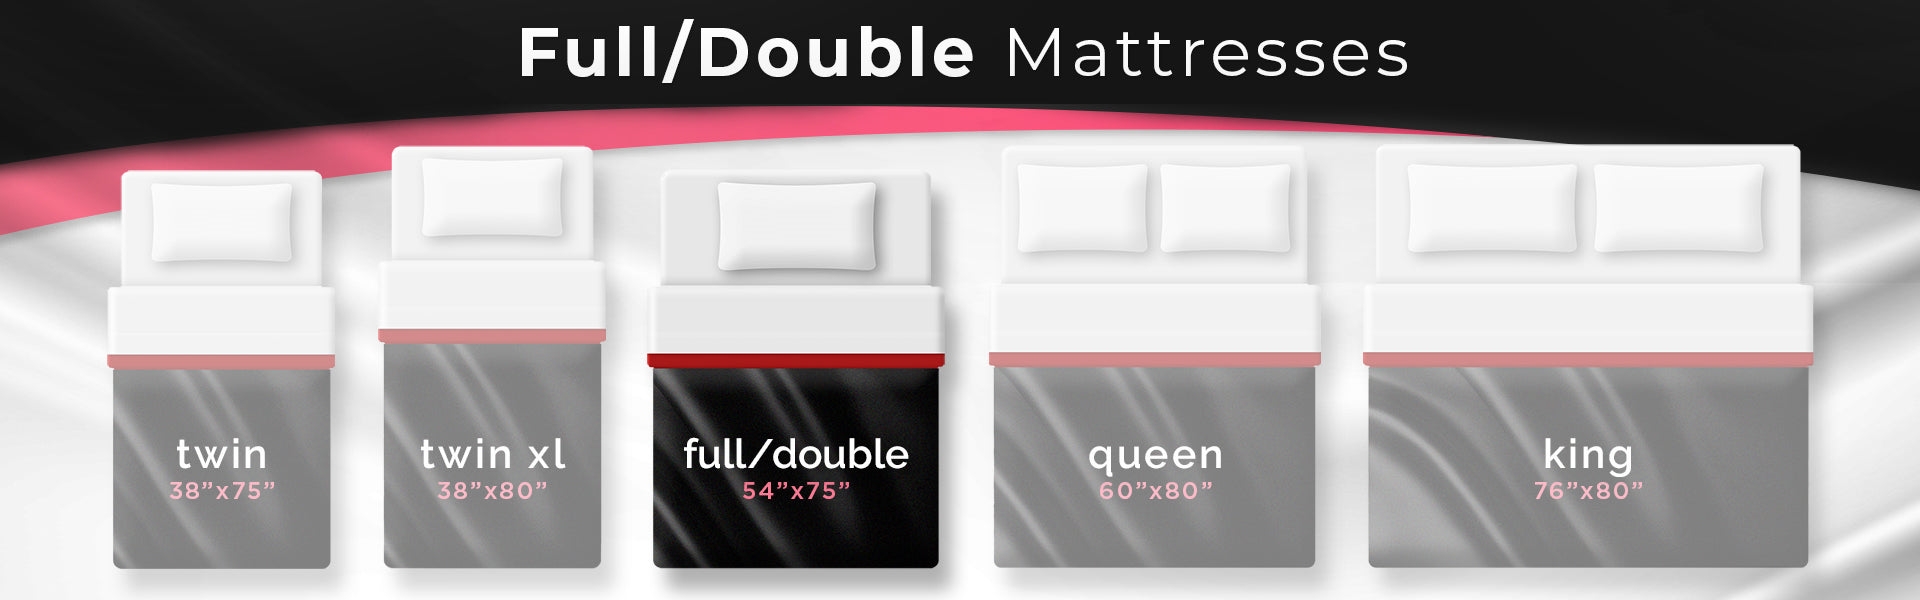 5 illustrated mattresses , double/ full size mattress highlighted dimensions